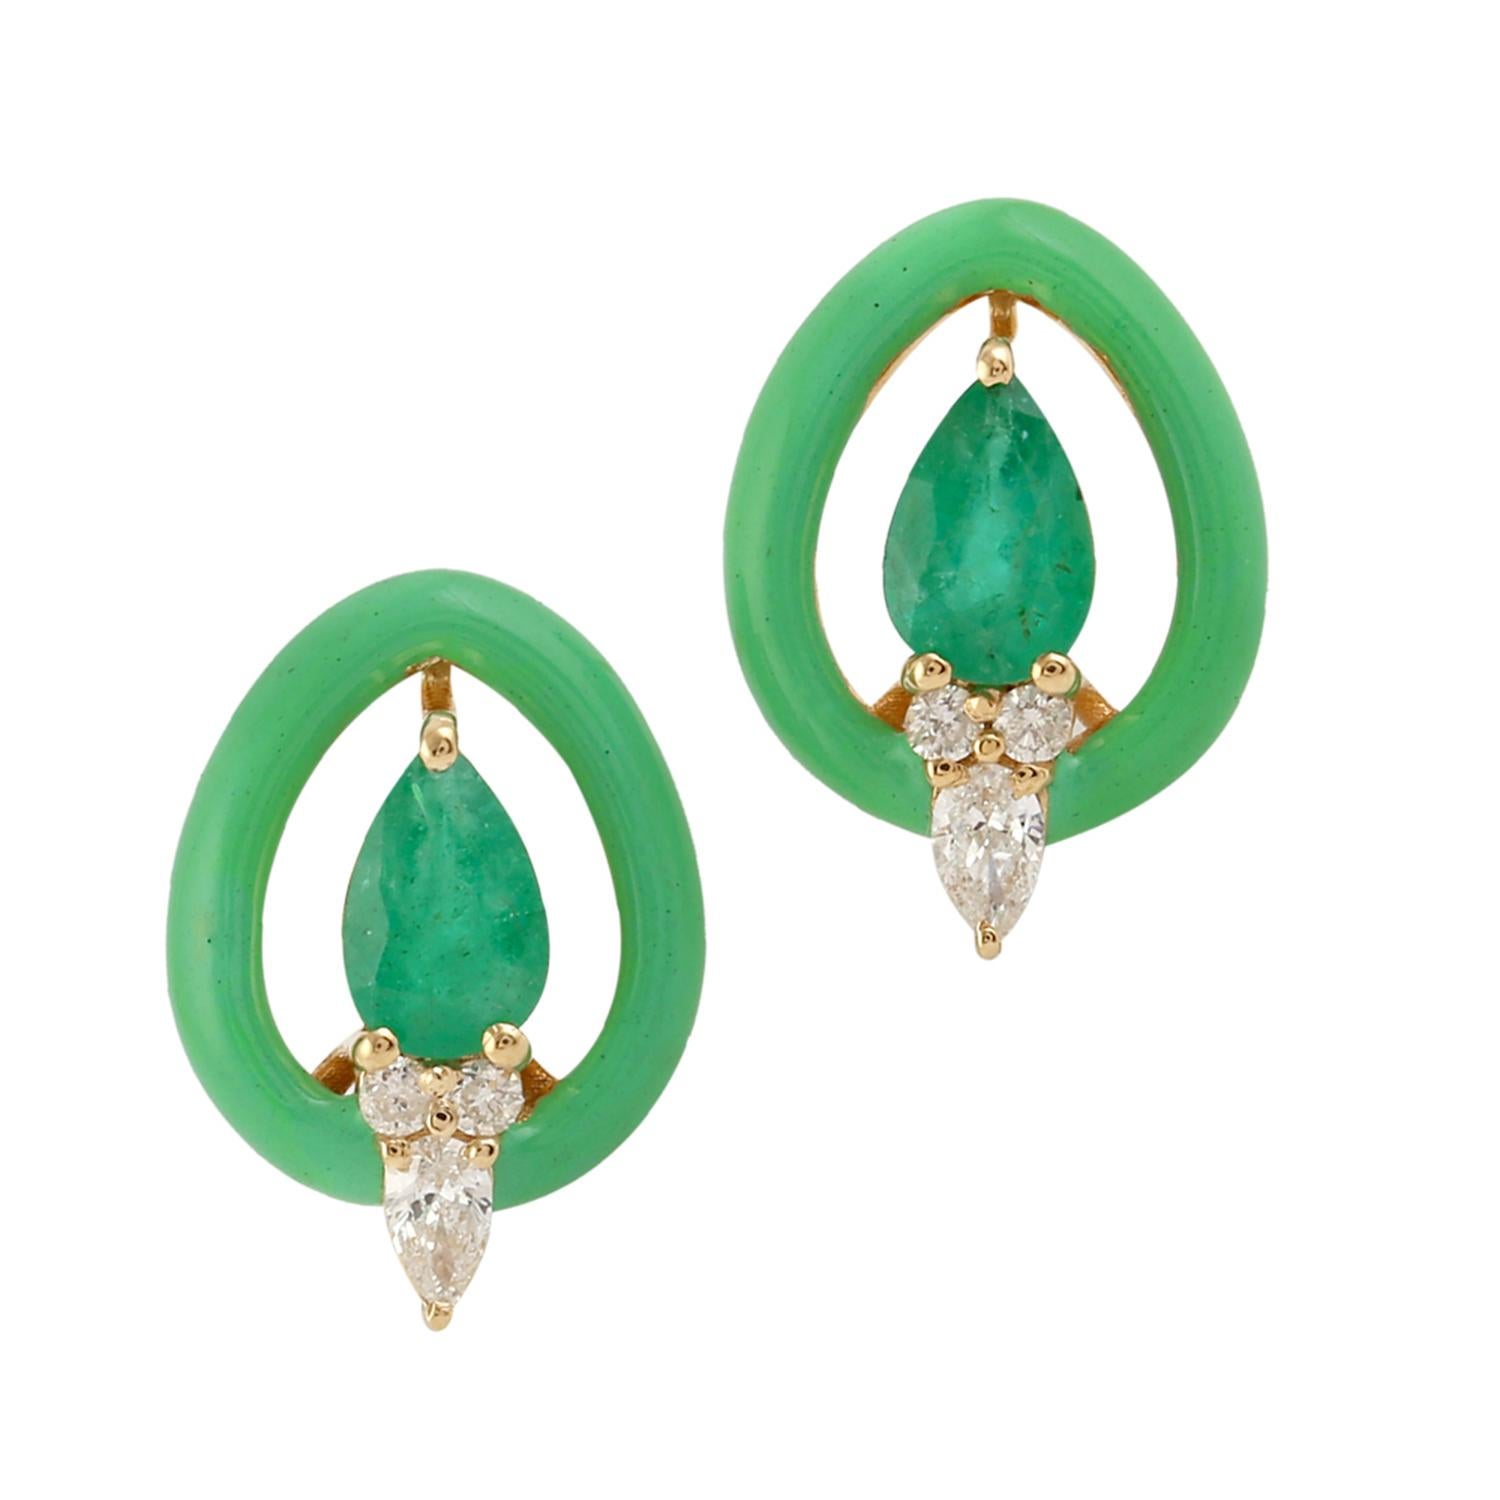 Mixed Cut Pear Shaped Emerald & Enamel Stud Earrings With Diamonds Made In 18k Yellow Gold For Sale